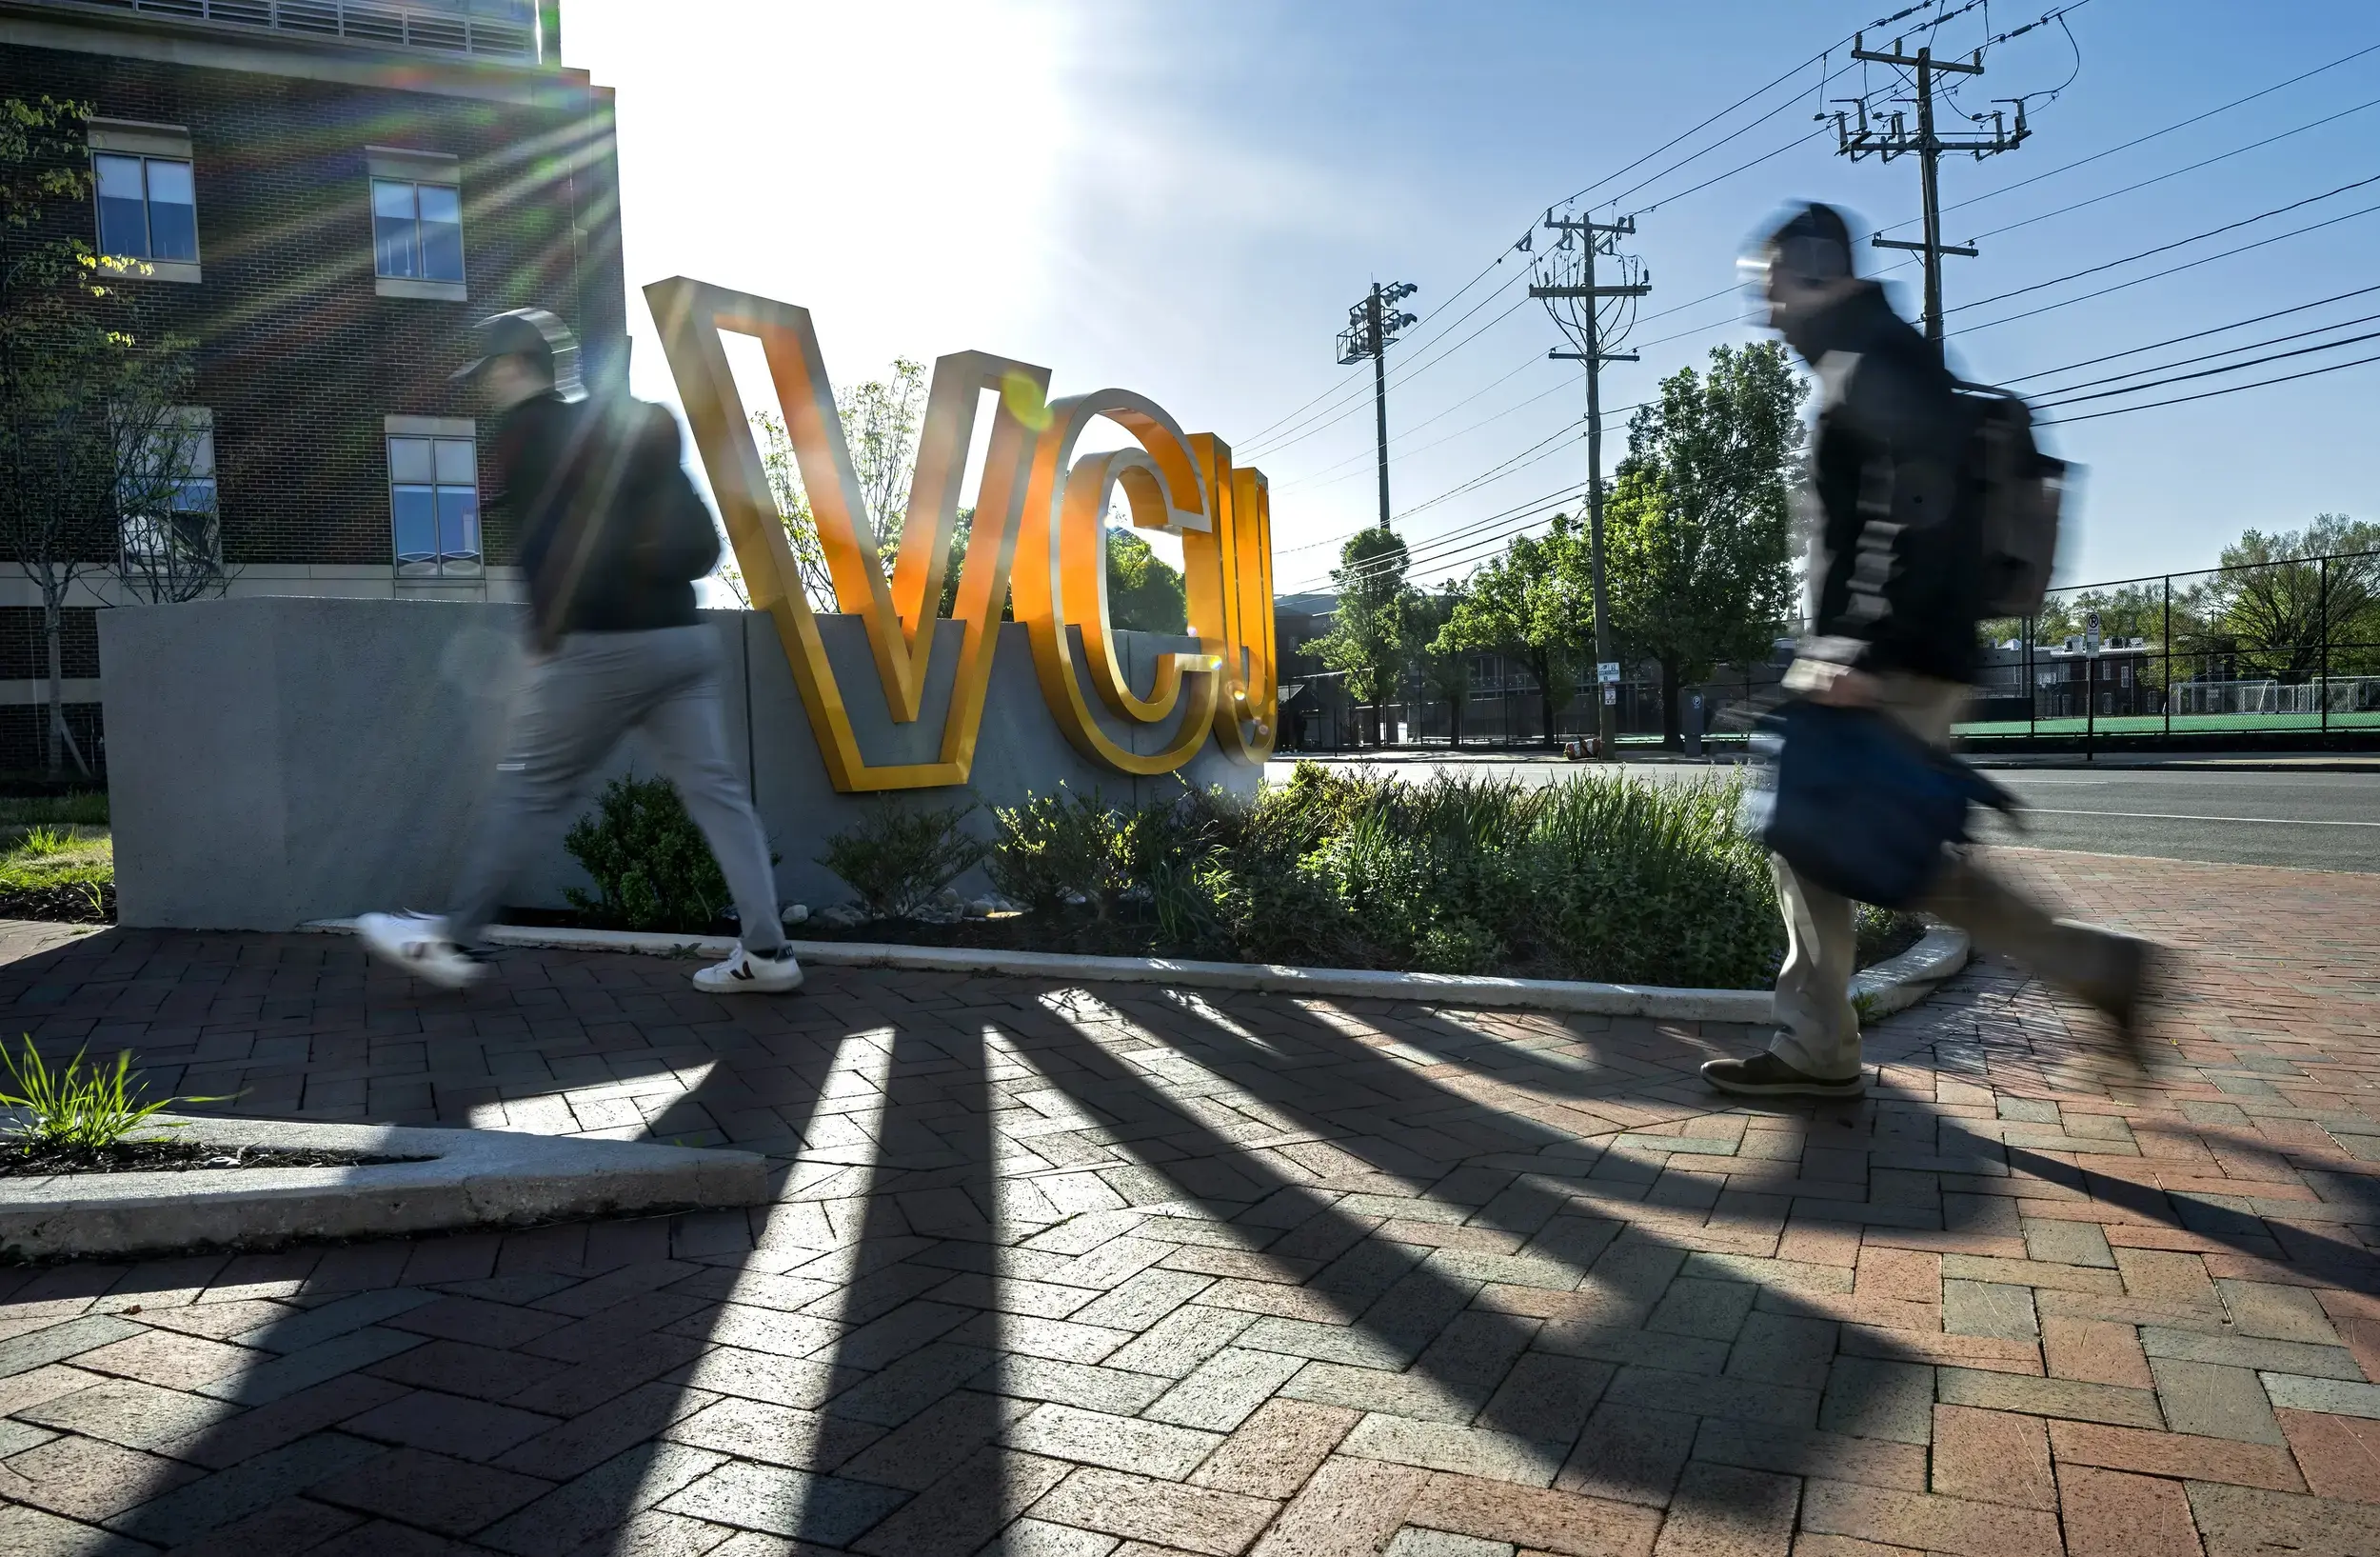 VCU ranked among top 20 most innovative public universities in the U.S.